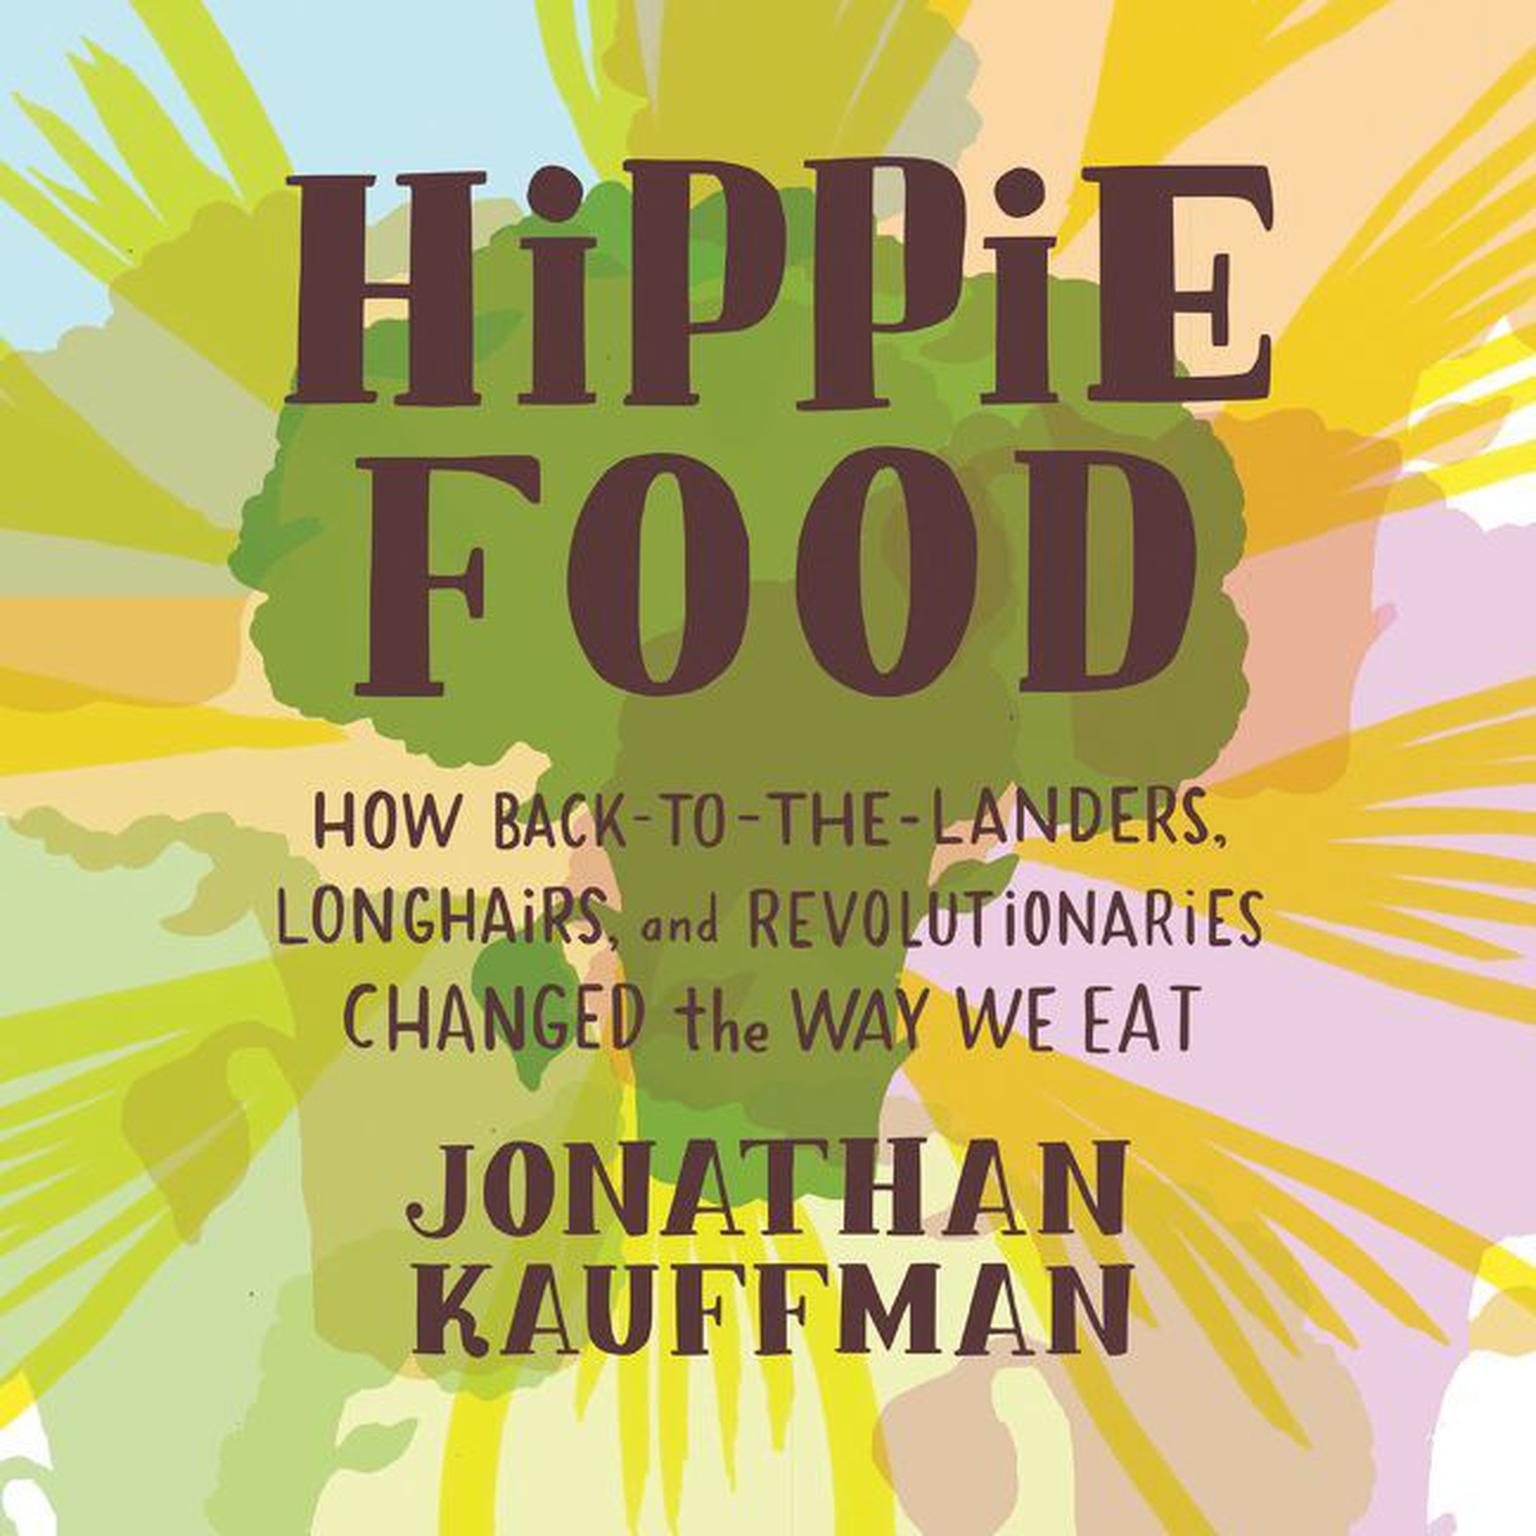 Hippie Food: How Back-to-the-Landers, Longhairs, and Revolutionaries Changed the Way We Eat Audiobook, by Jonathan Kauffman